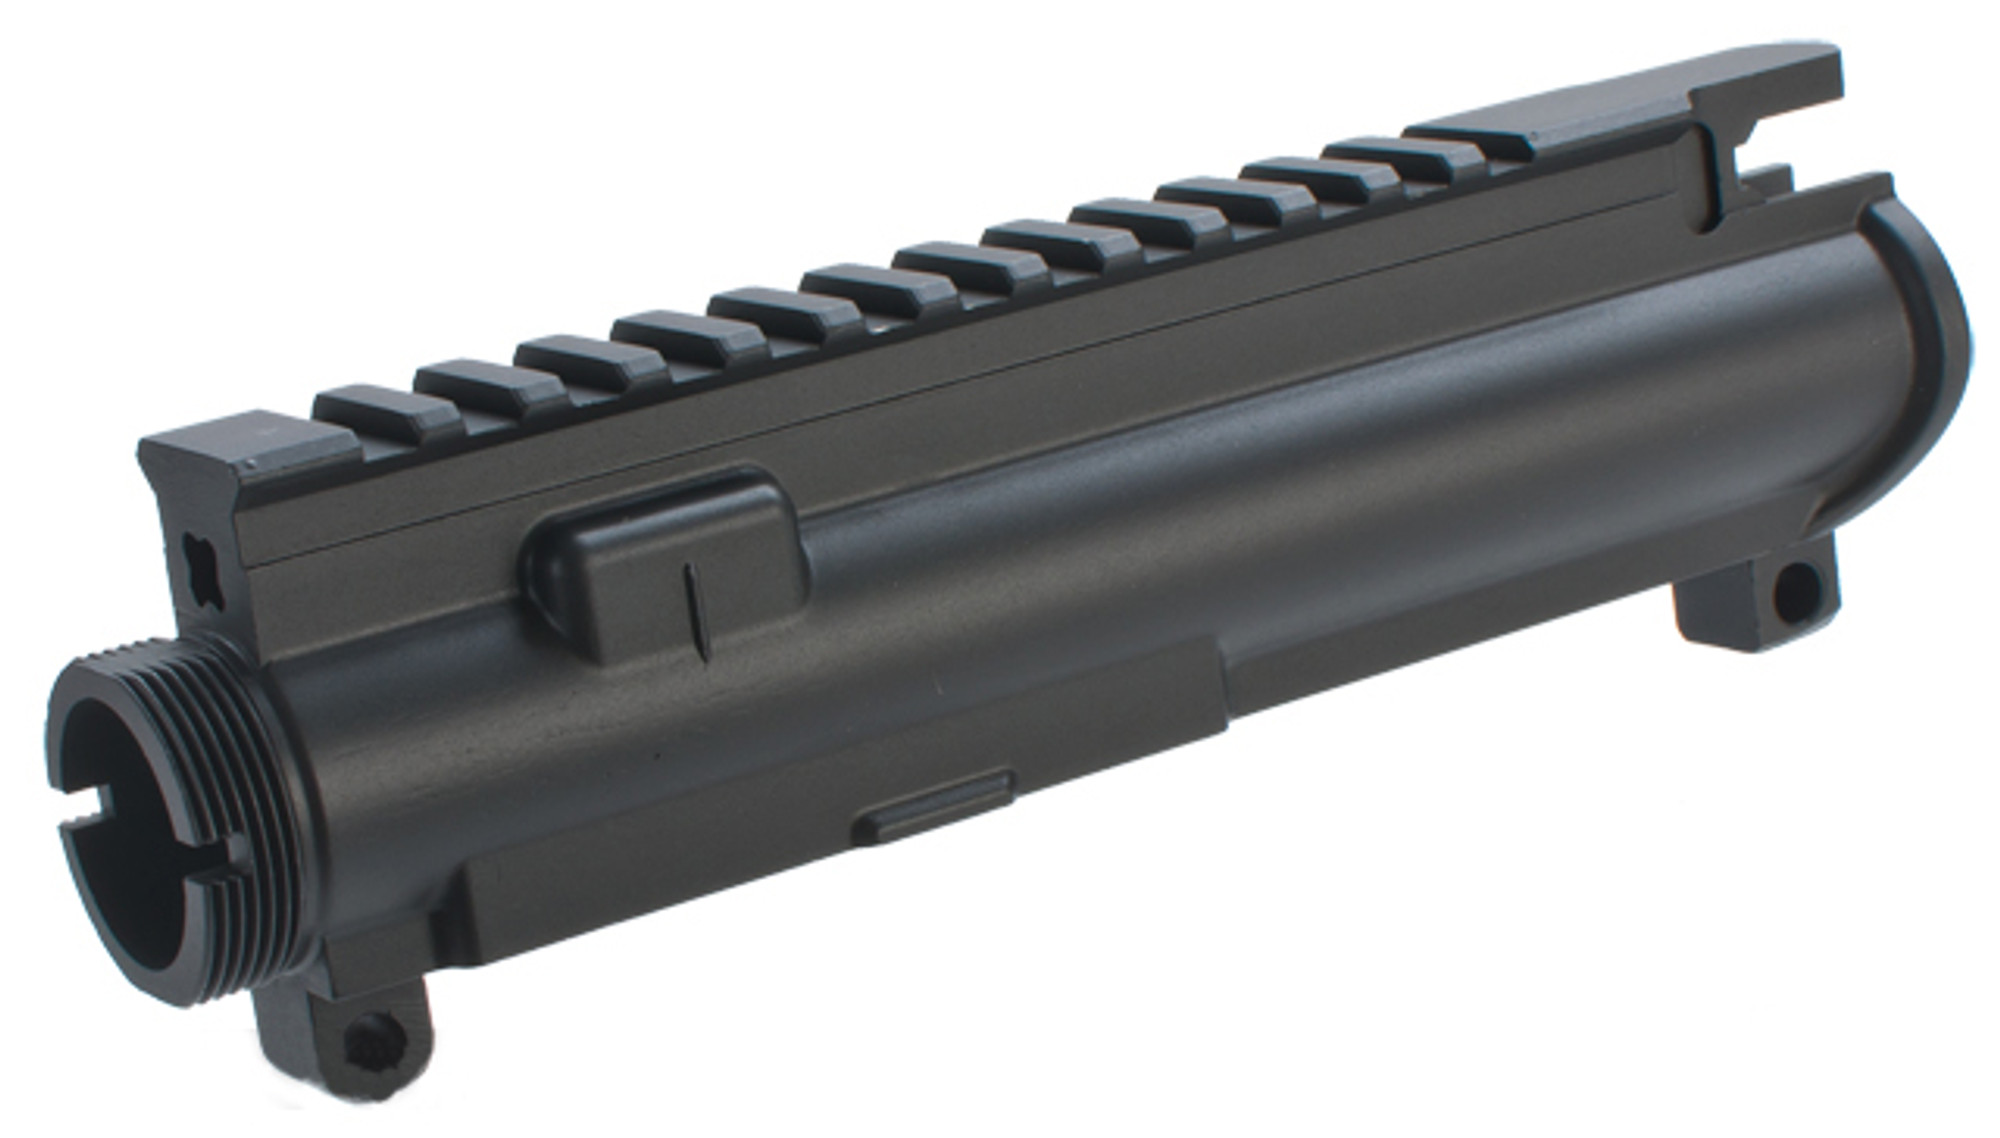 WE-Tech Upper Receiver for M4 Series Airsoft GBB Rifles